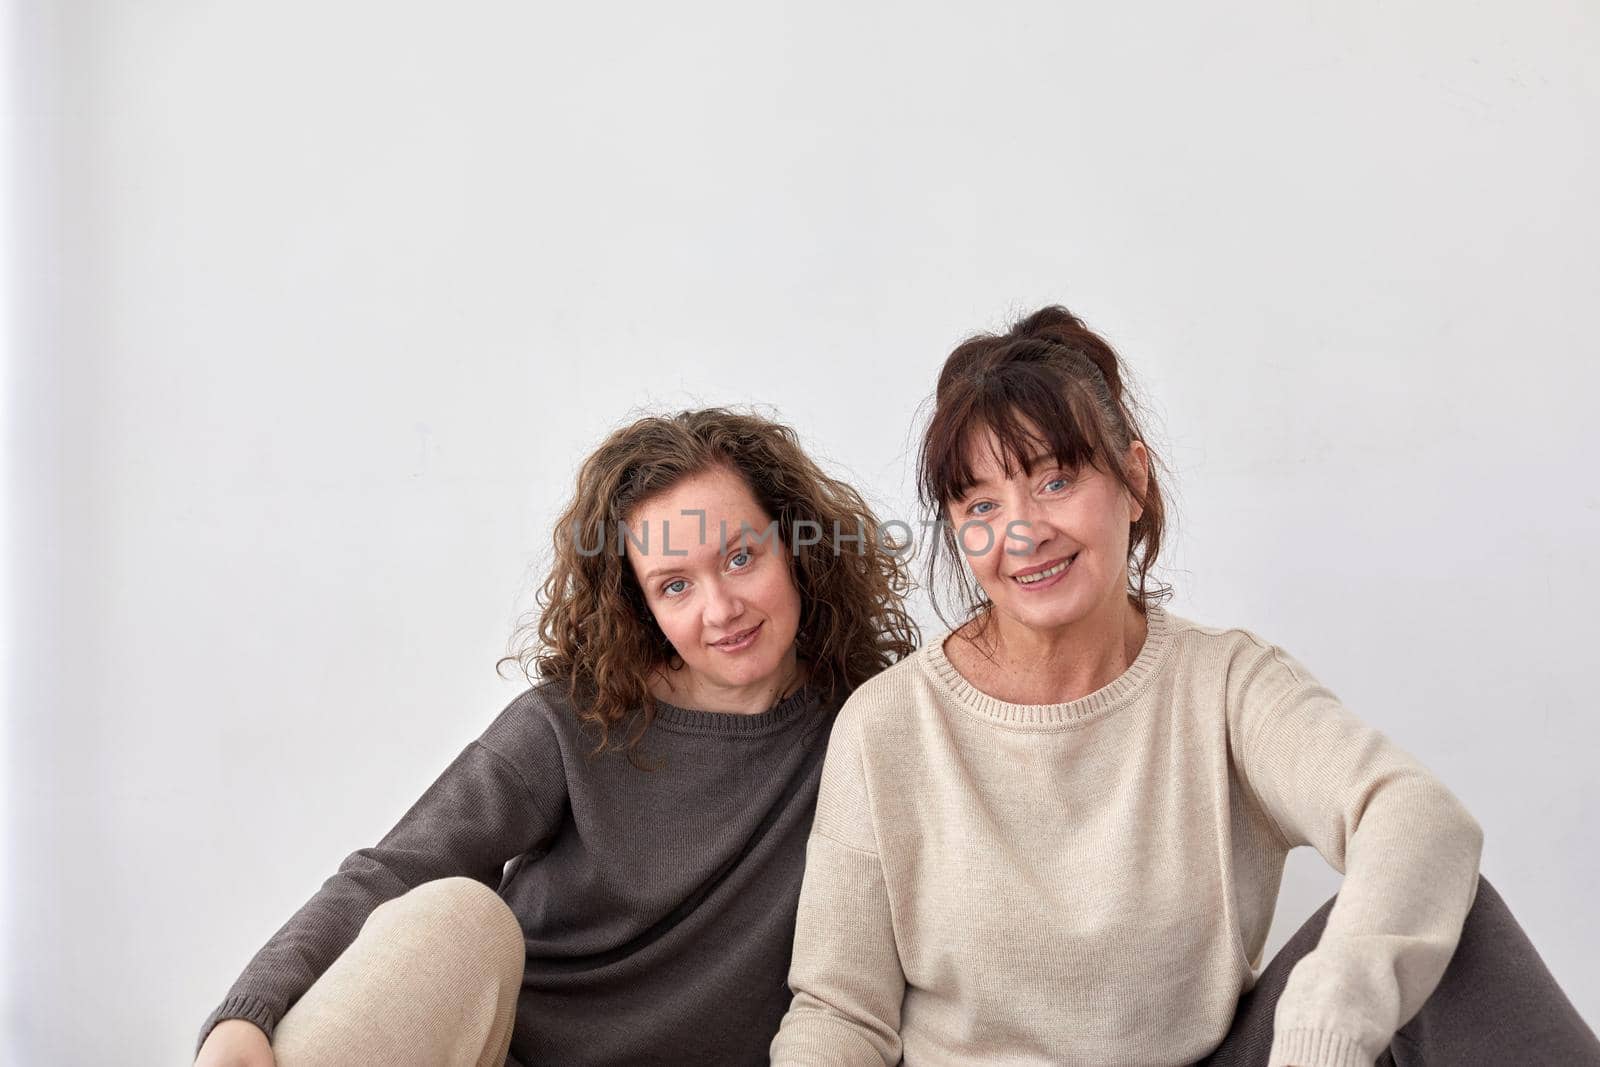 Smiling mother and daughter at home on white background by Demkat